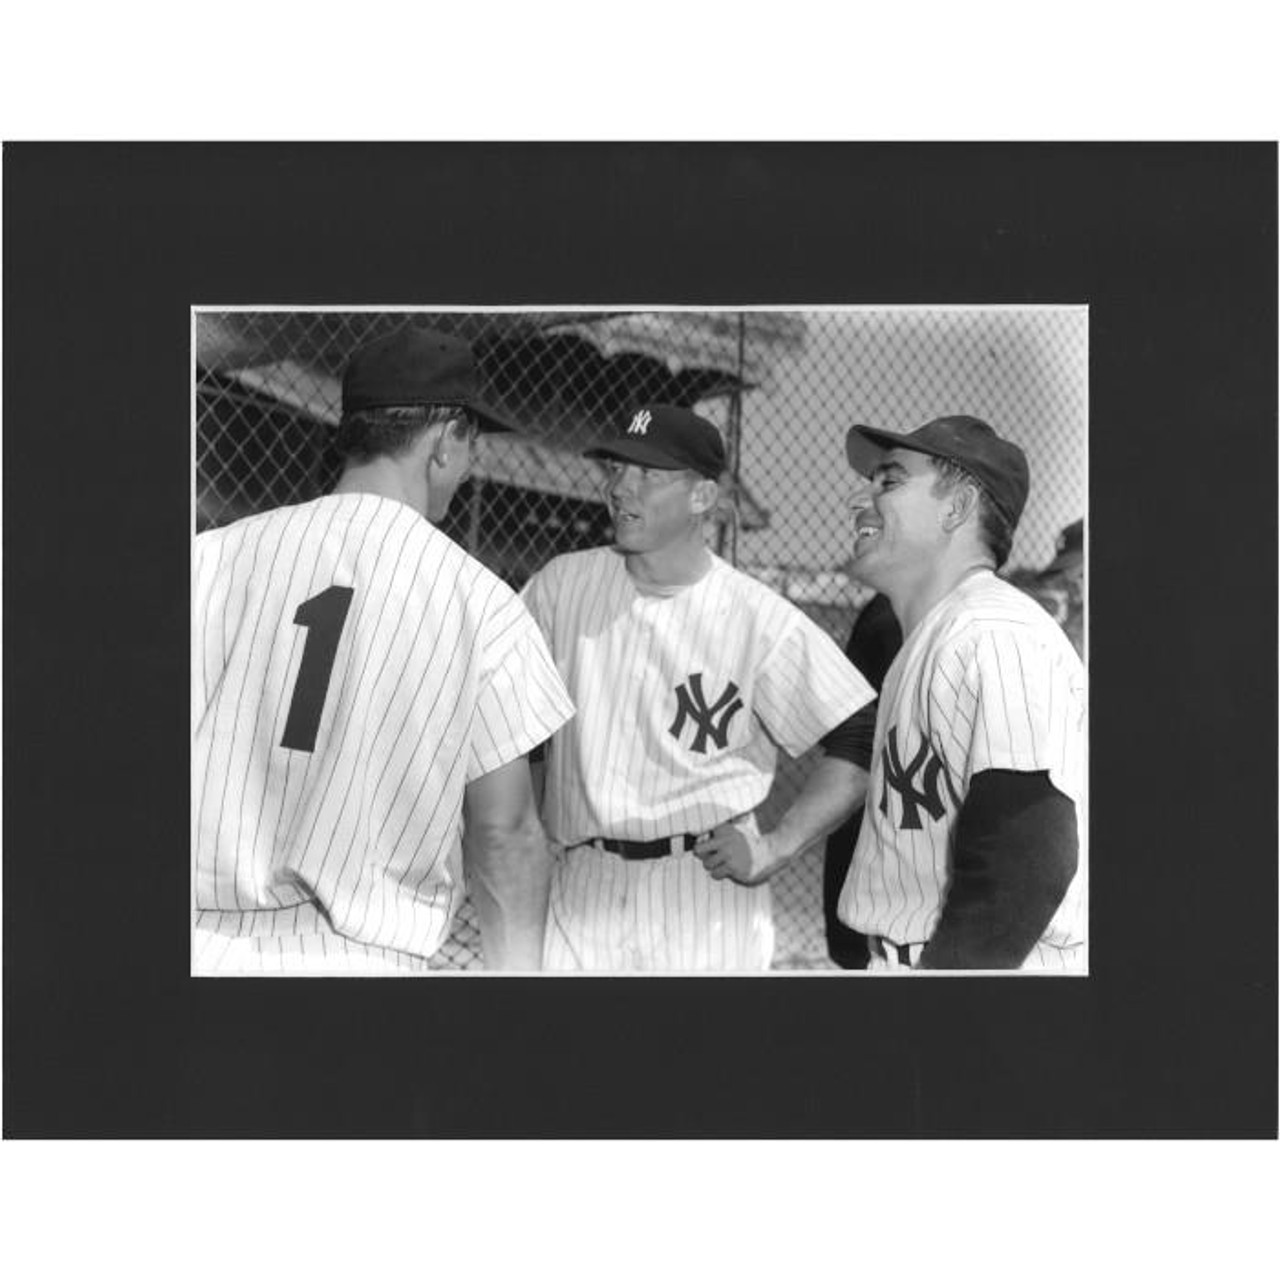 The New York Yankees Roger Maris, Yogi Berra, and Mickey Mantle in an 11x14  Classic Black and White Photograph.